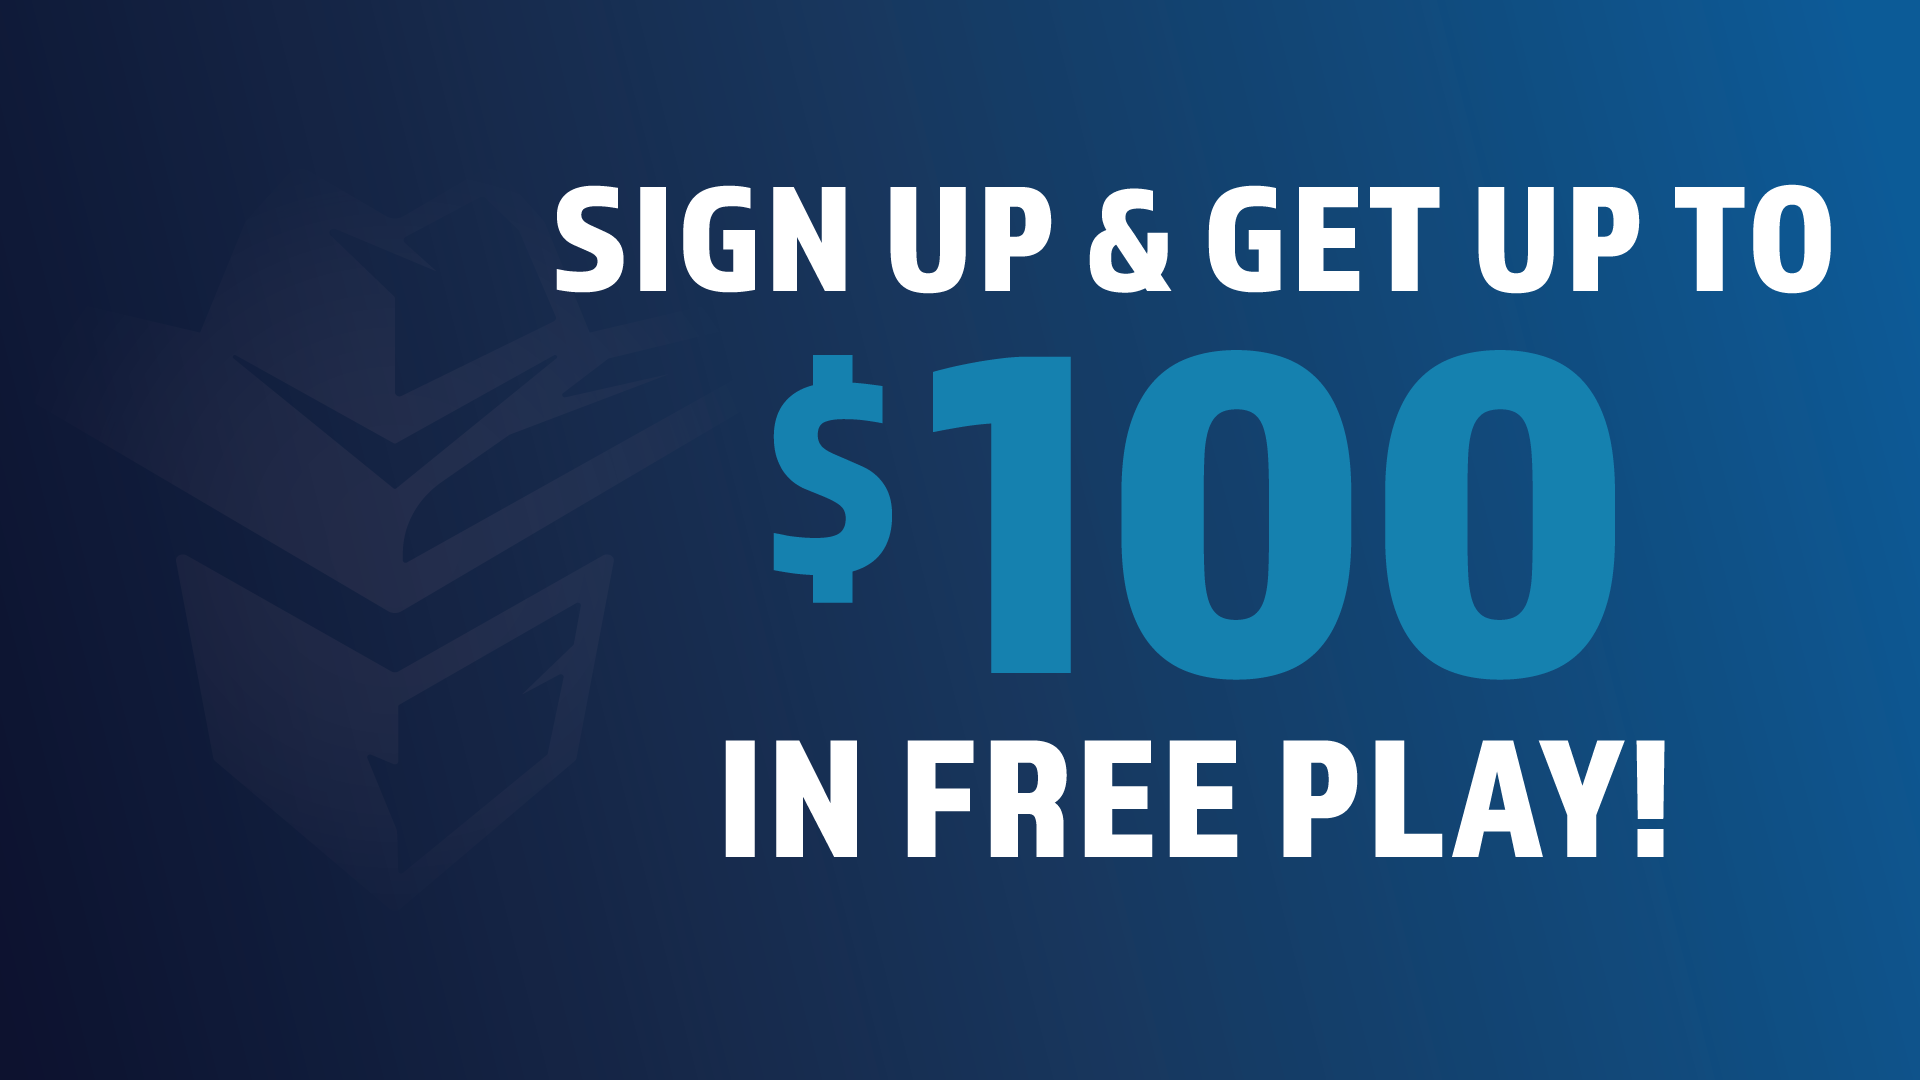 Sign Up and Get Up To $100 in Free Play